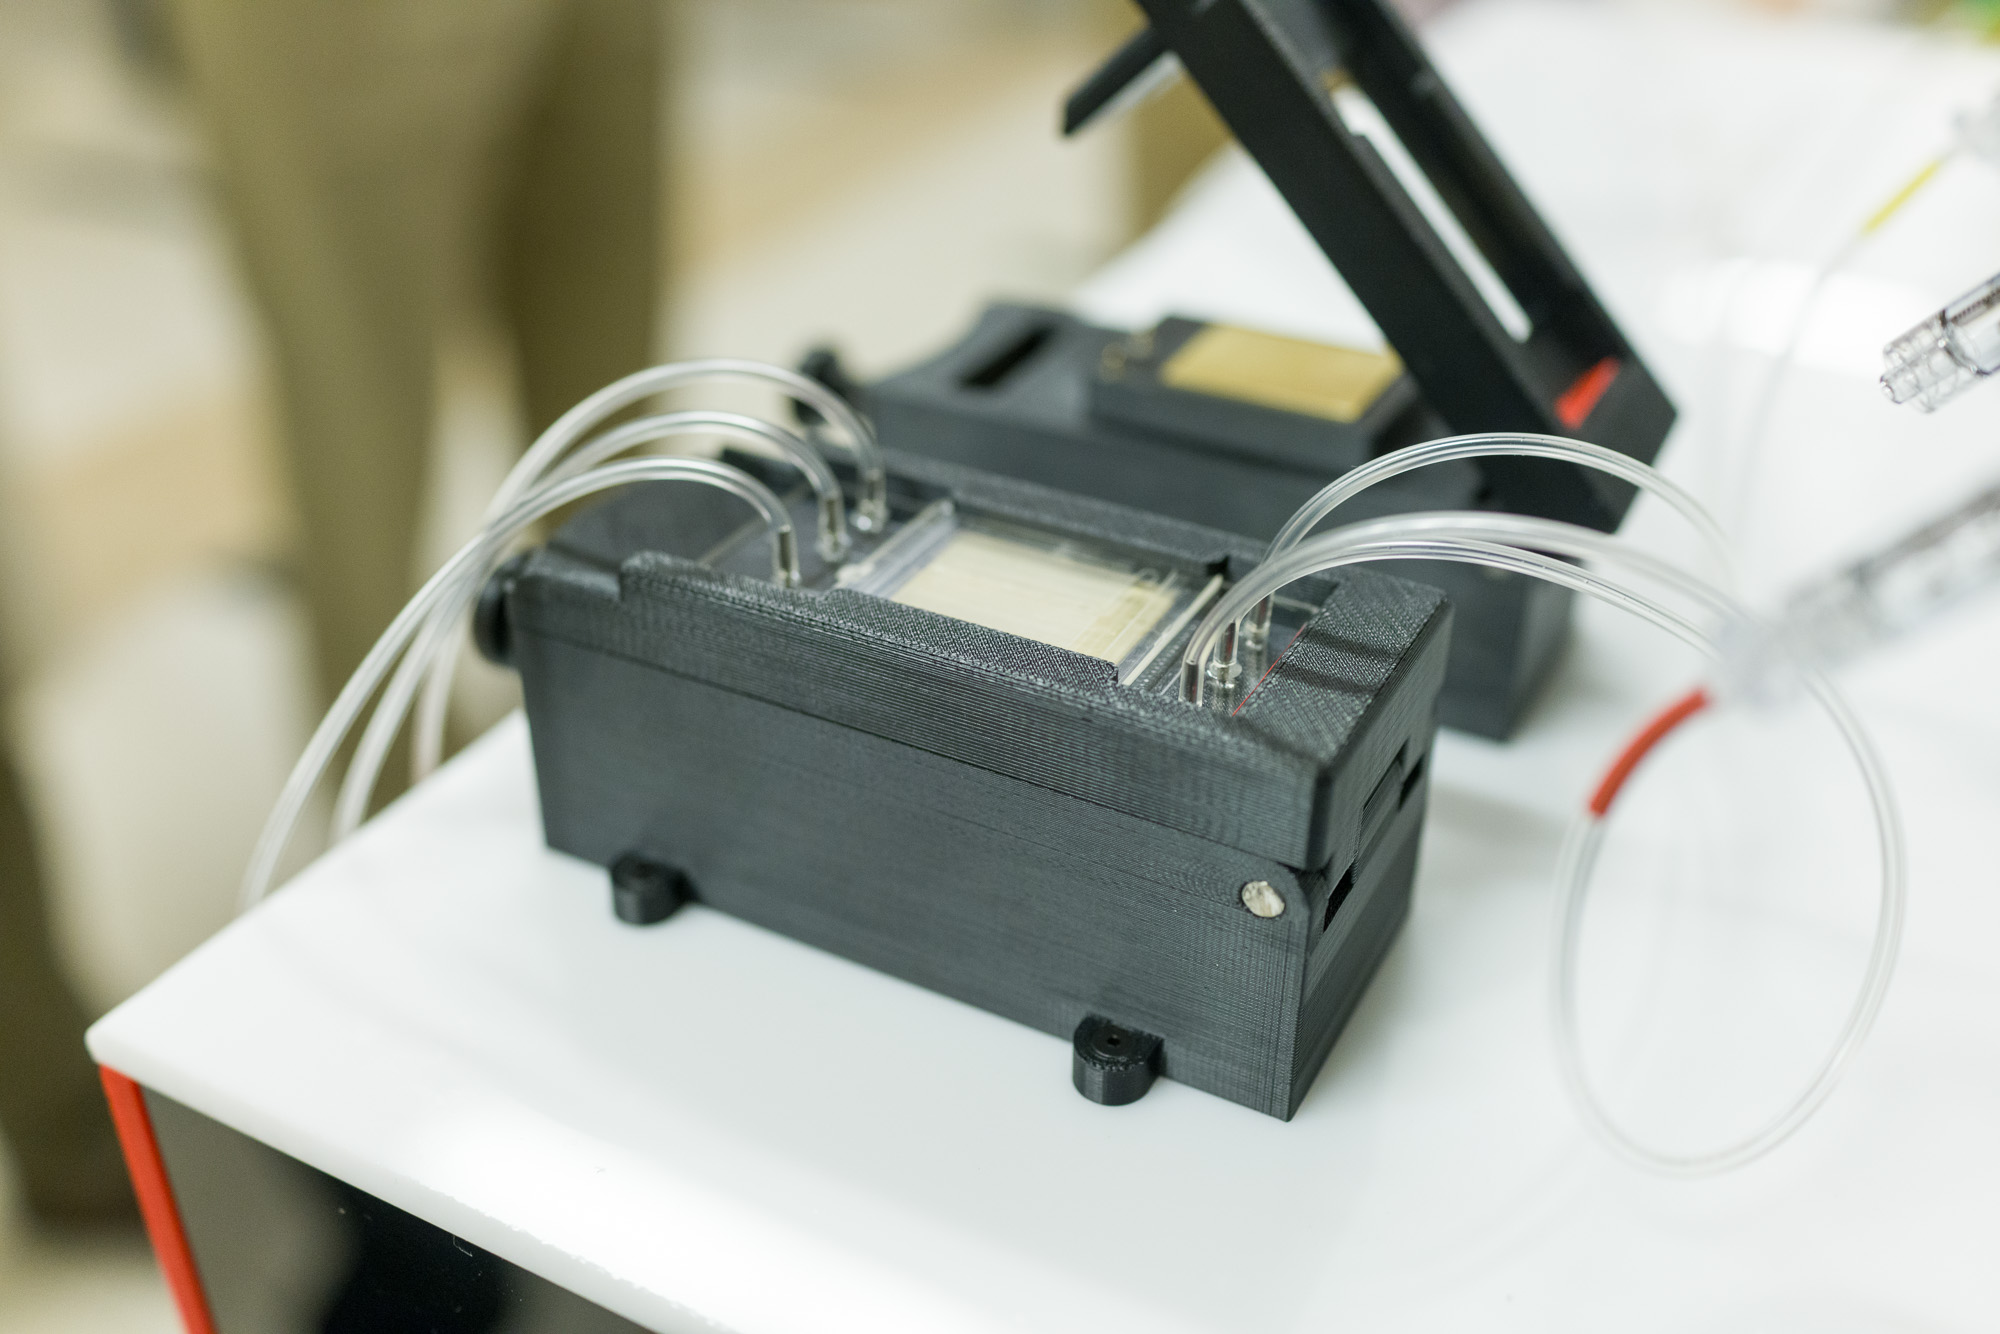 A close-up of a black, 3D-printed device with transparent tubes attached, resting on a white surface with a red edge.